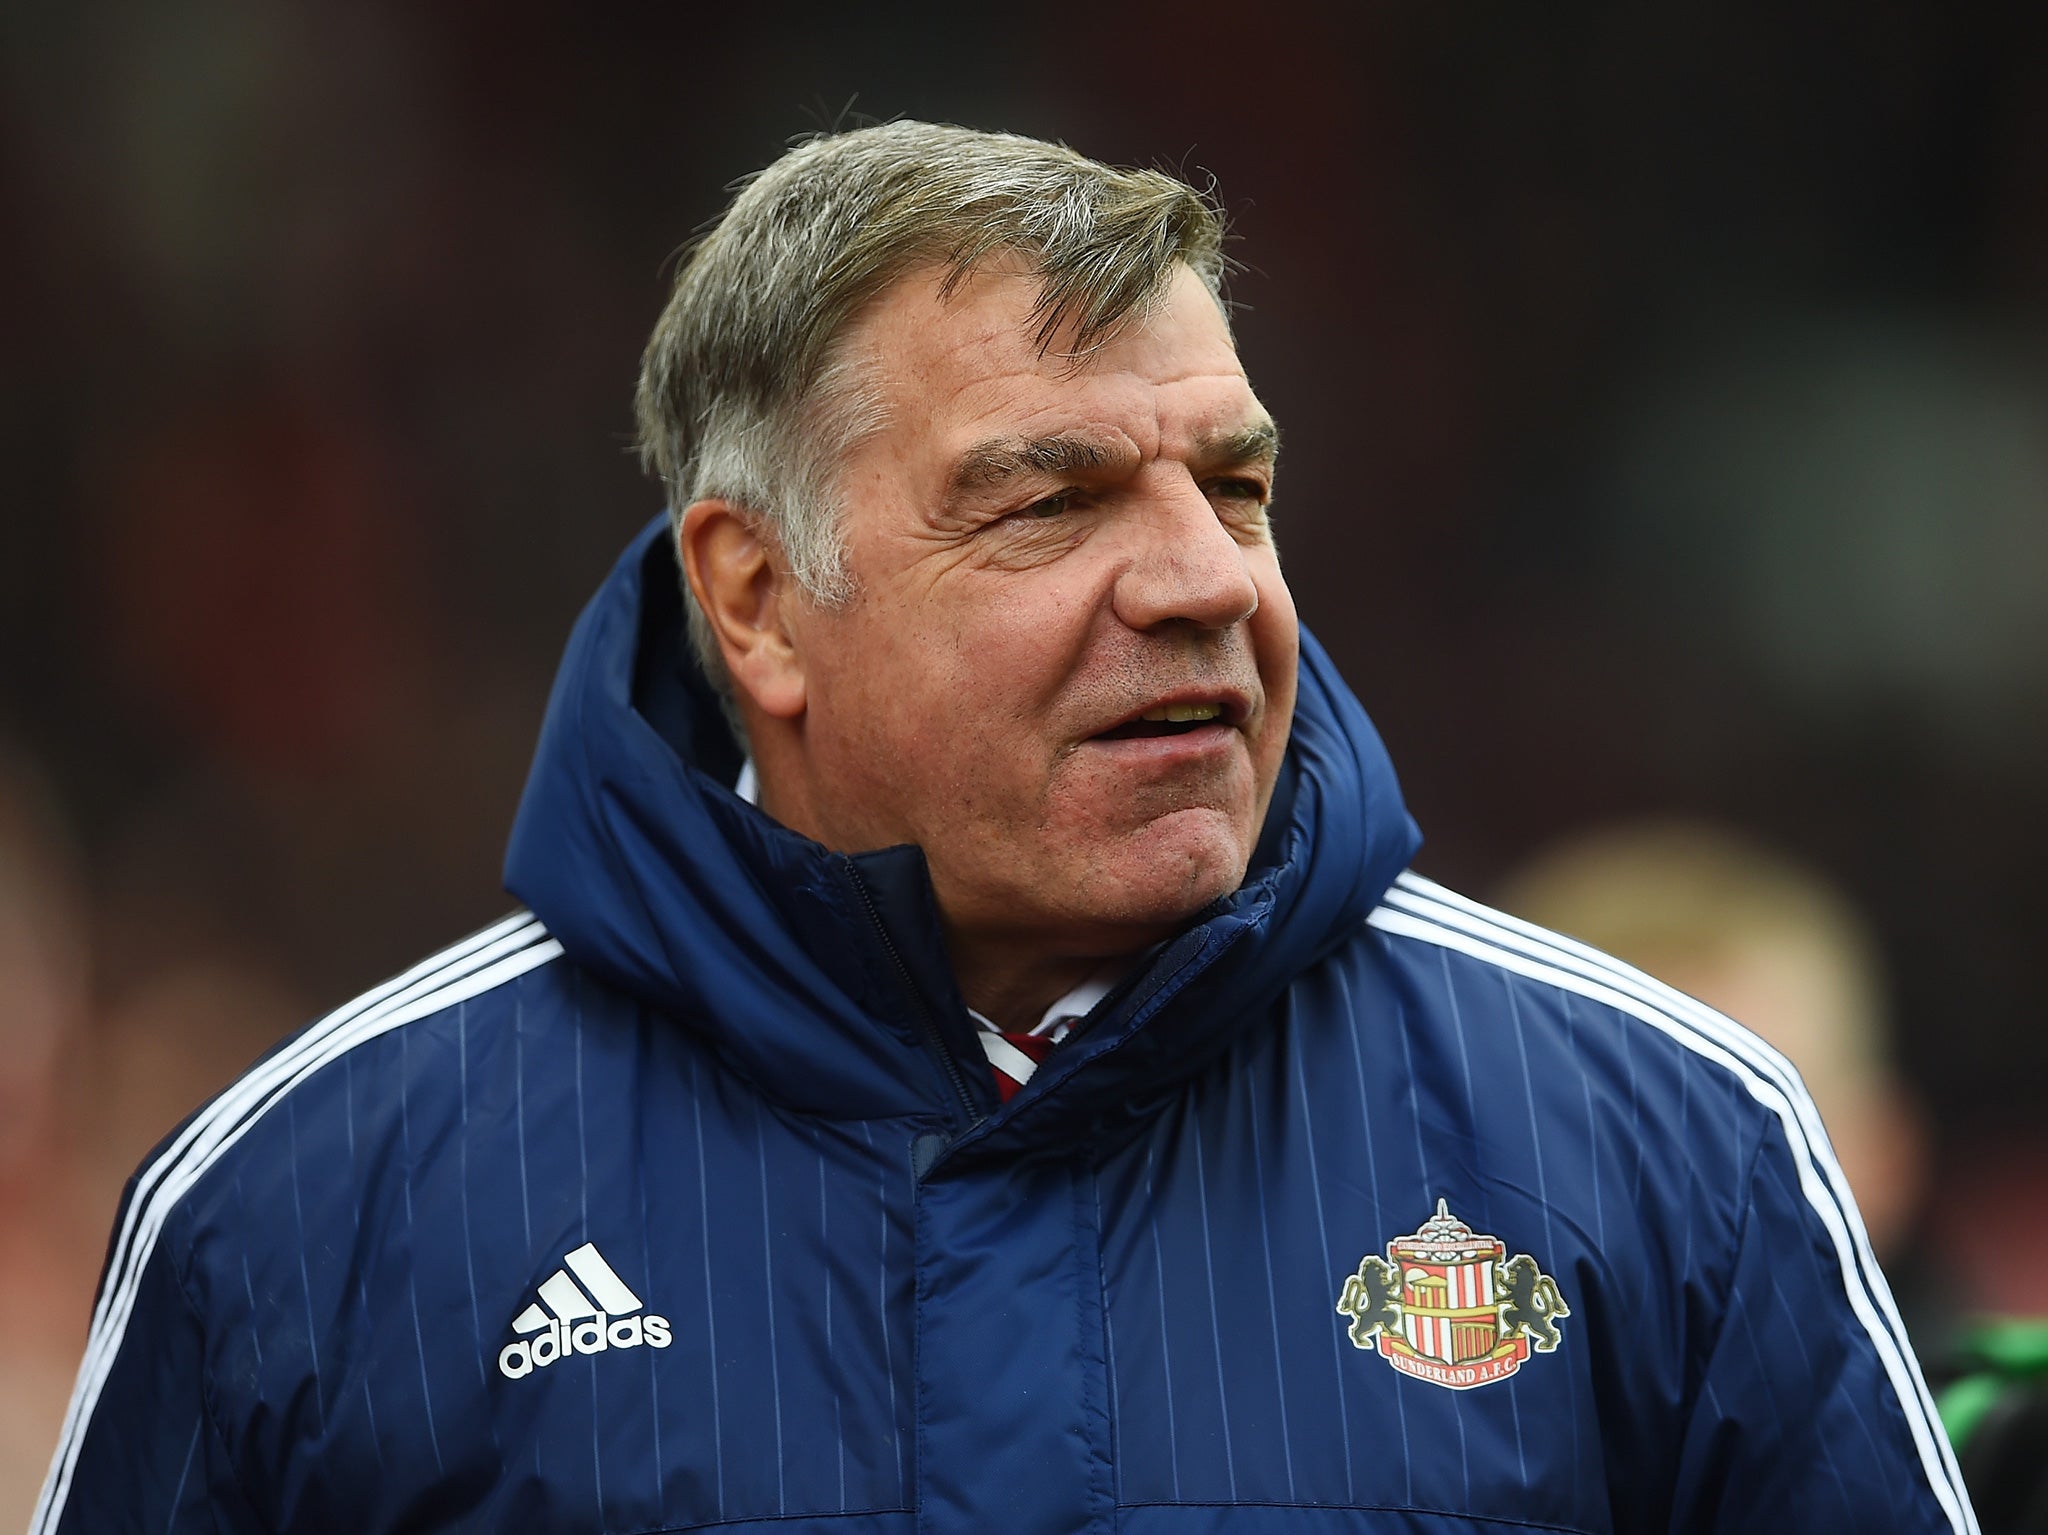 Sam Allardyce to be named new England manager on Thursday, The Independent